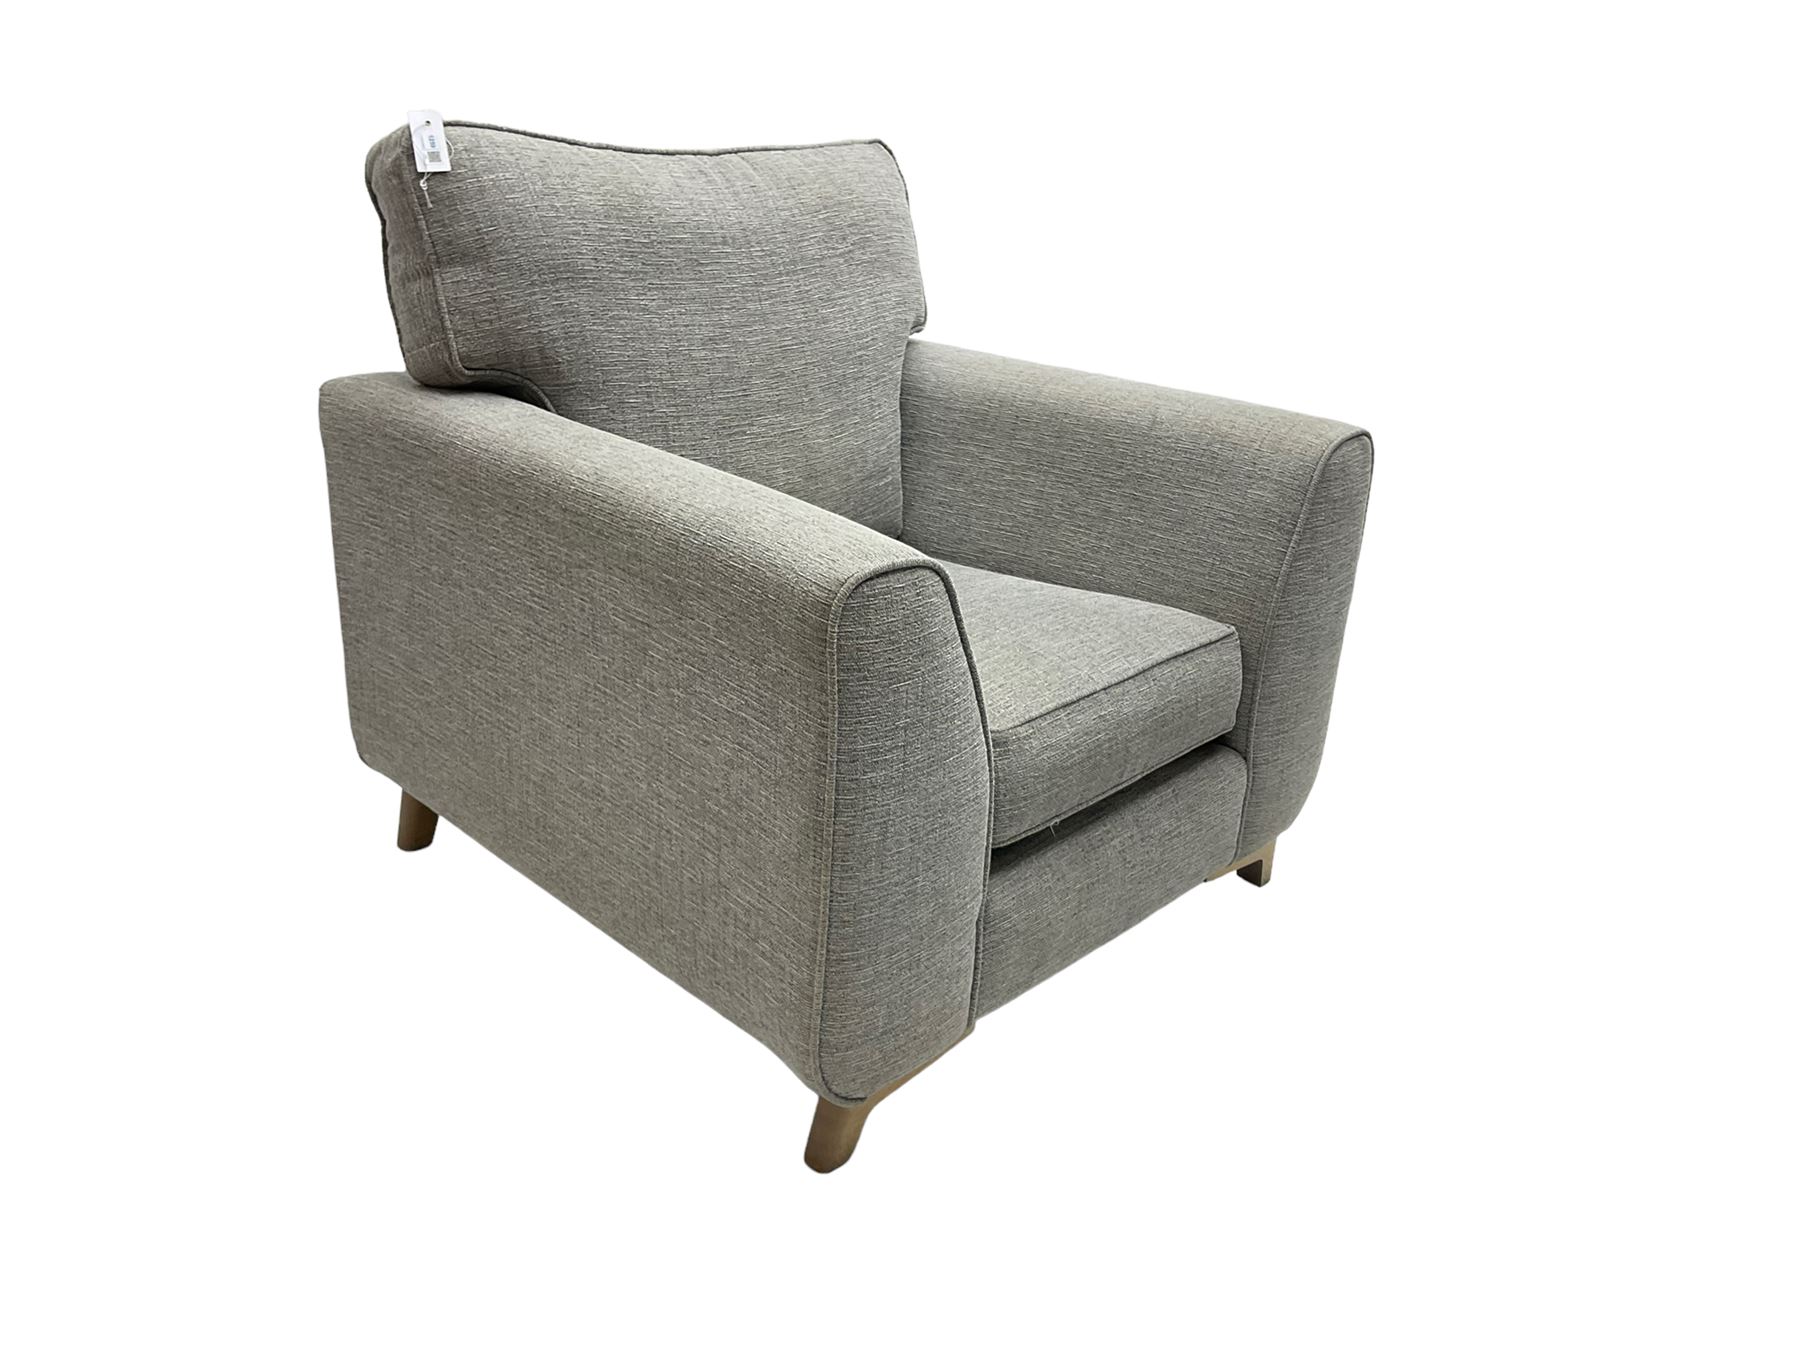 Armchair upholstered in graphite grey fabric - Image 3 of 7